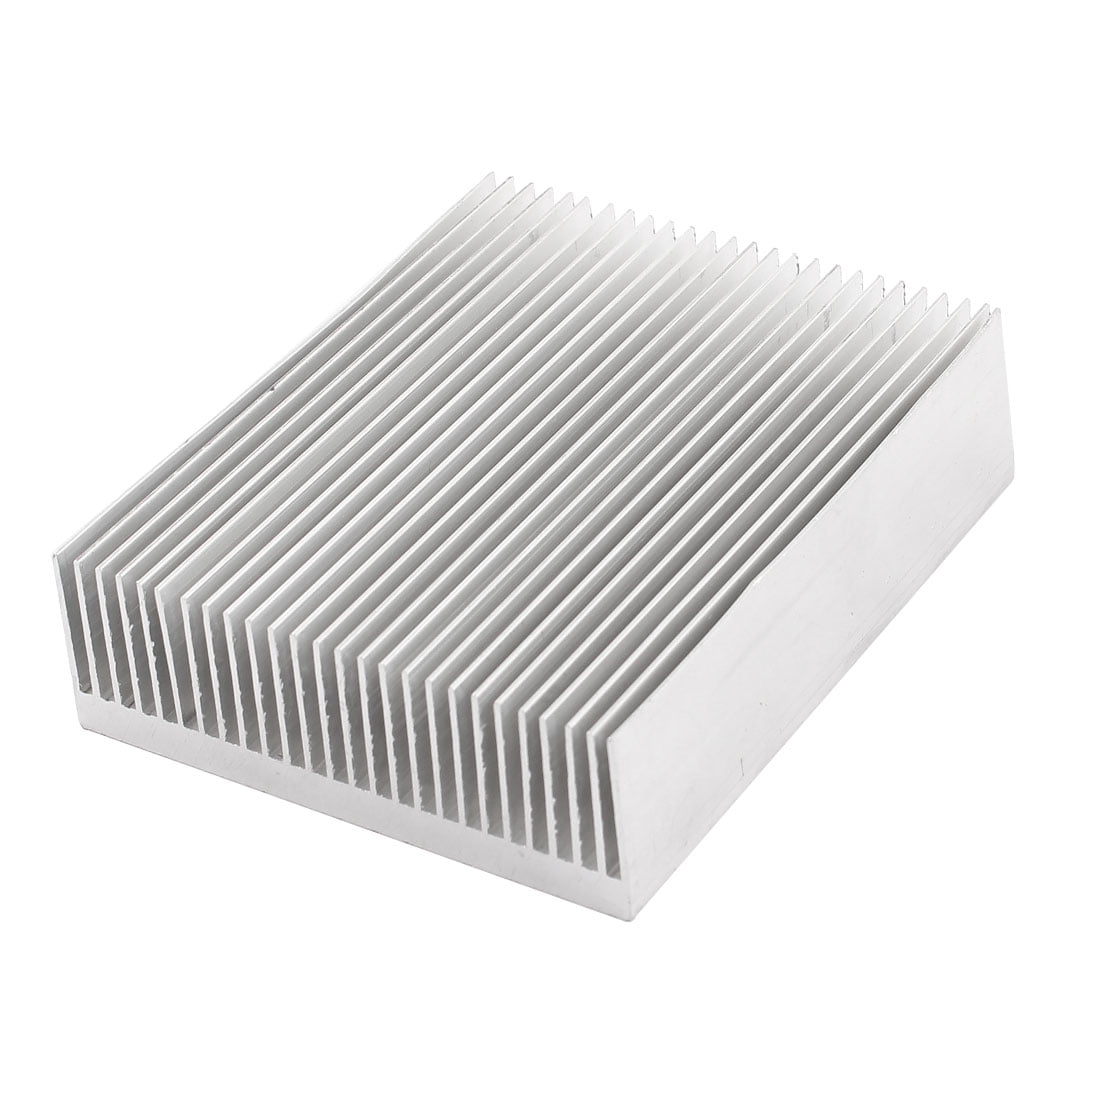 90mm*90mm*15mm Cooling Fin Heat Sink for PCB LED Power Memory Chip IC Radiator 